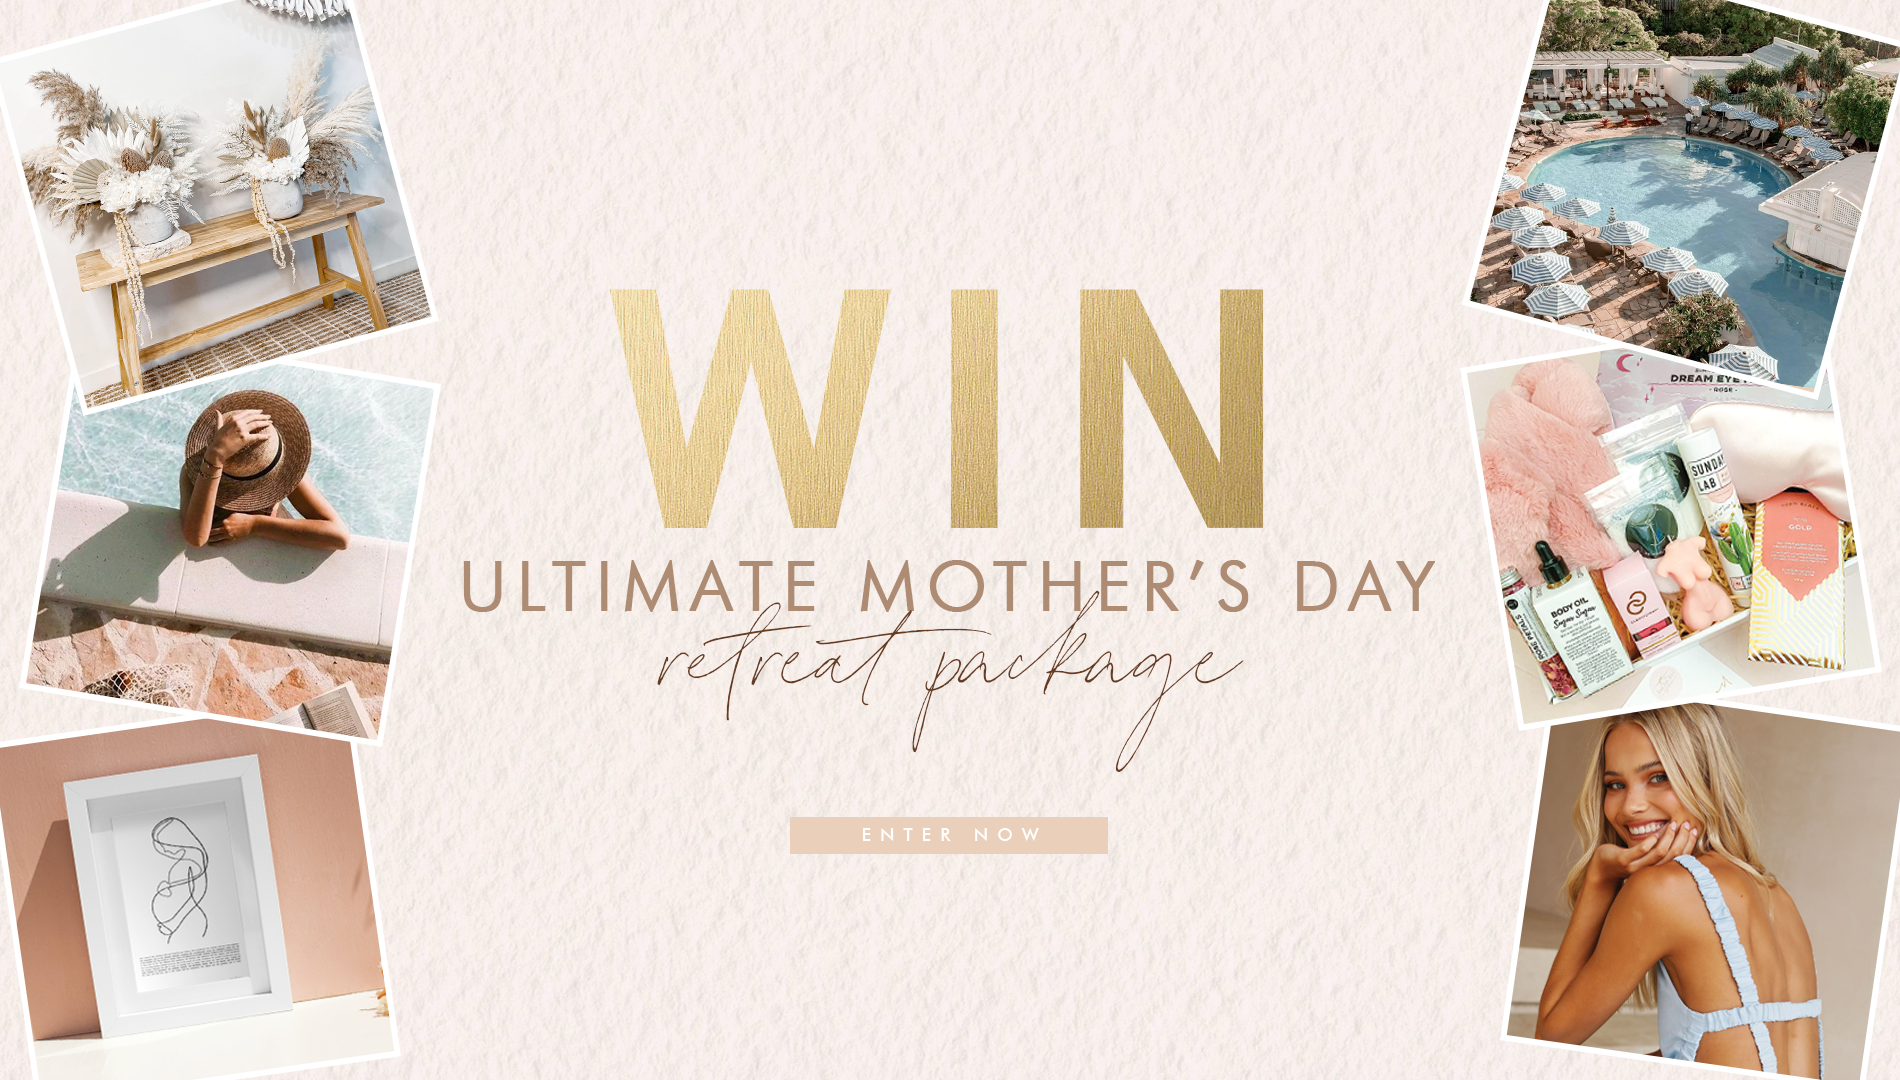 WIN the Ultimate Mothers Day Retreat Package!